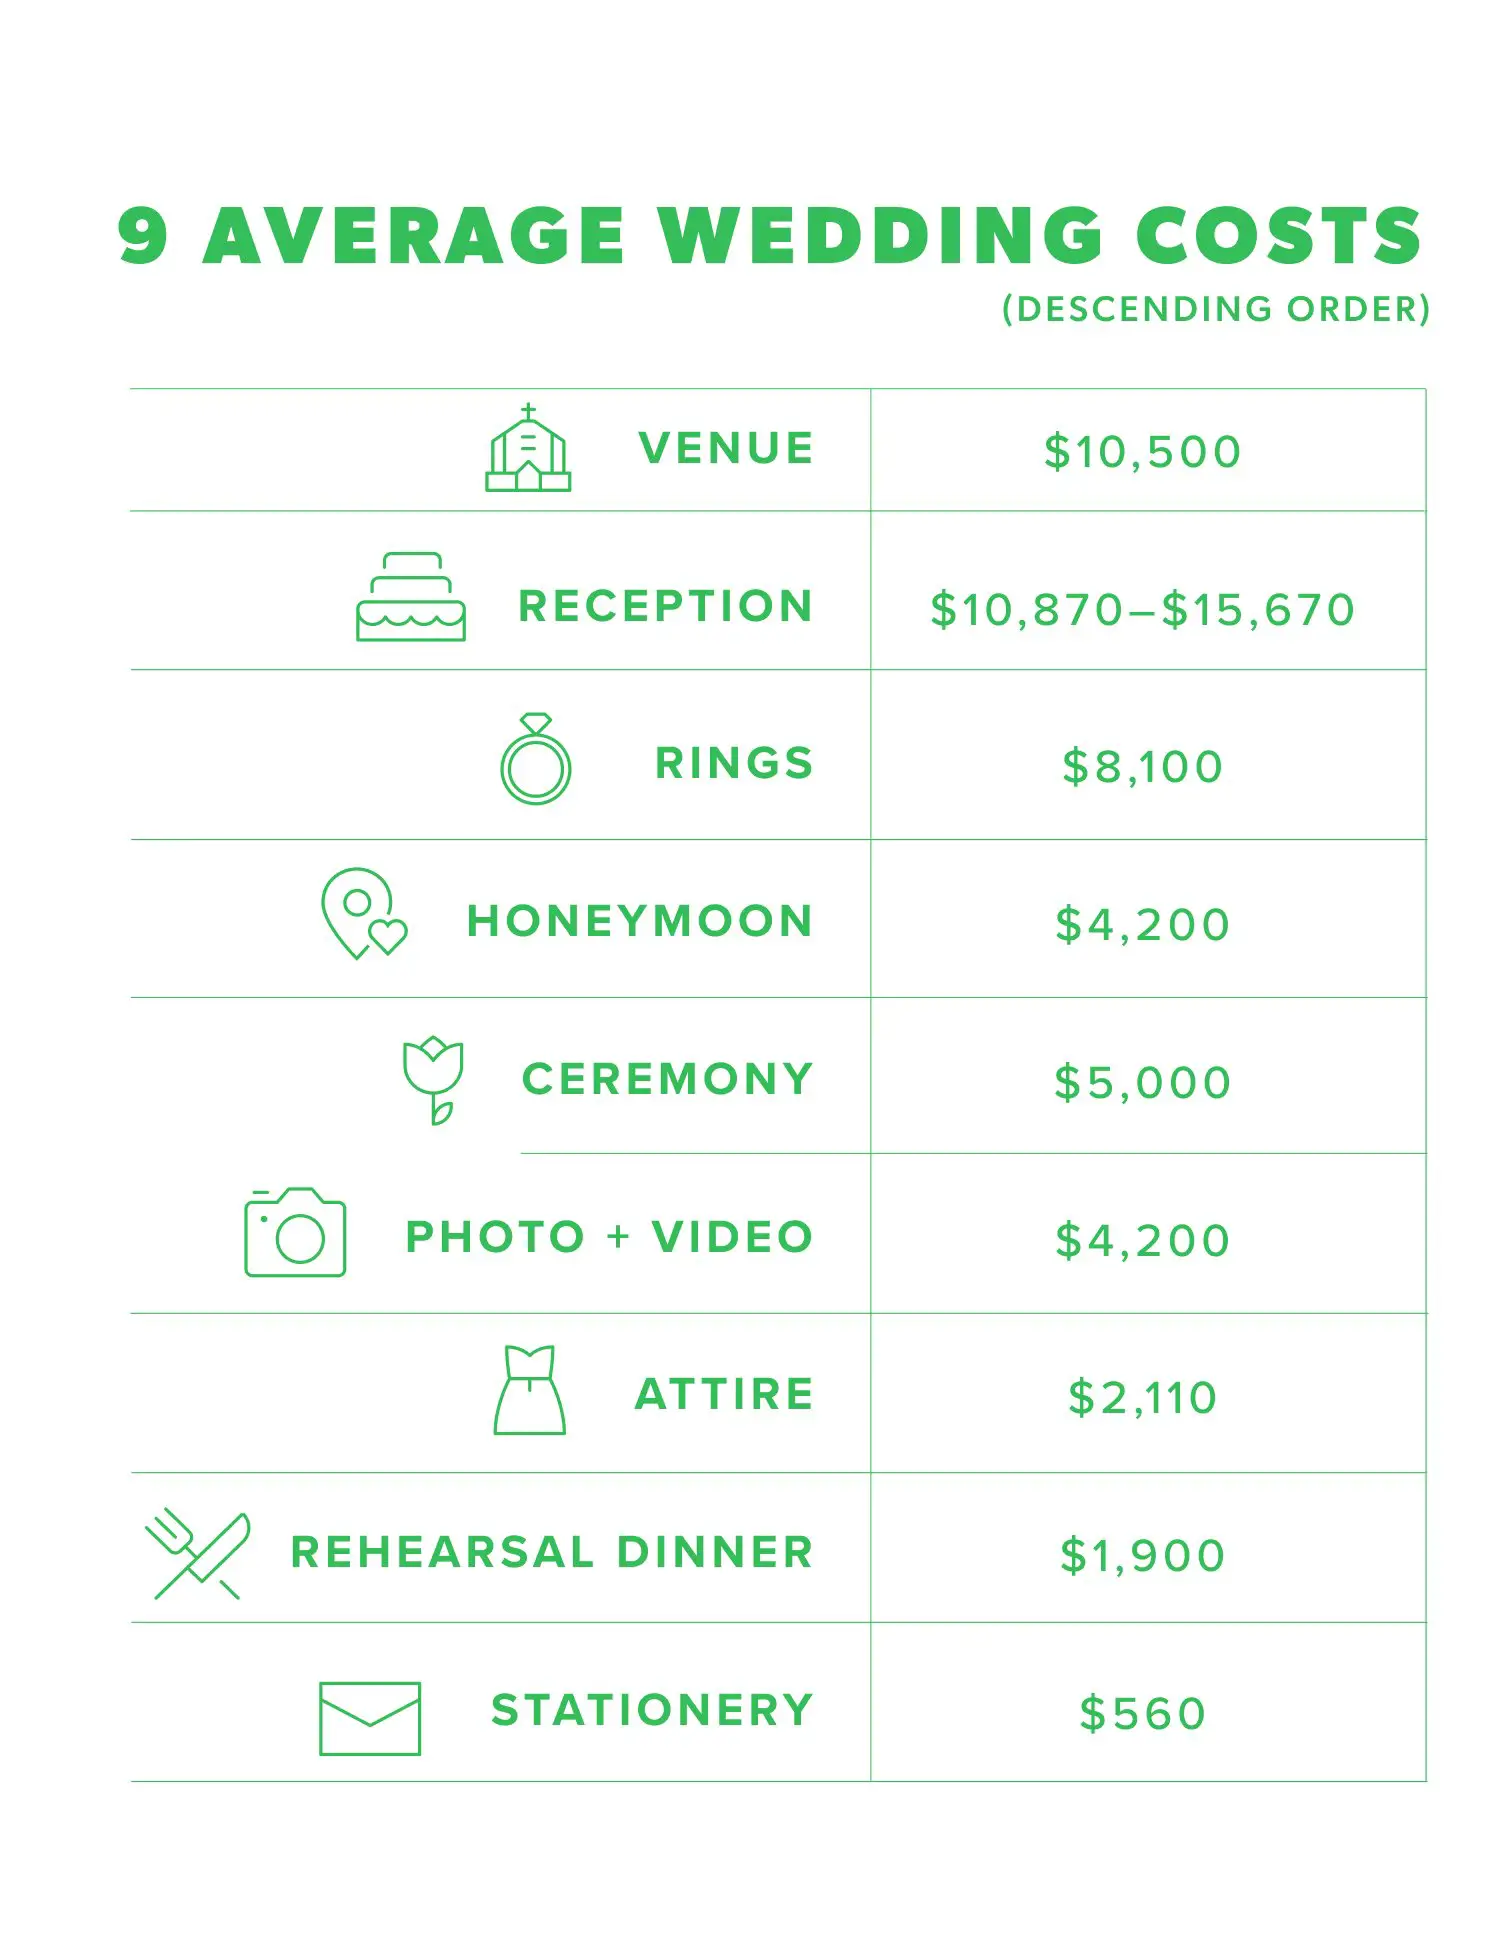 How Much Does a Wedding Cost?